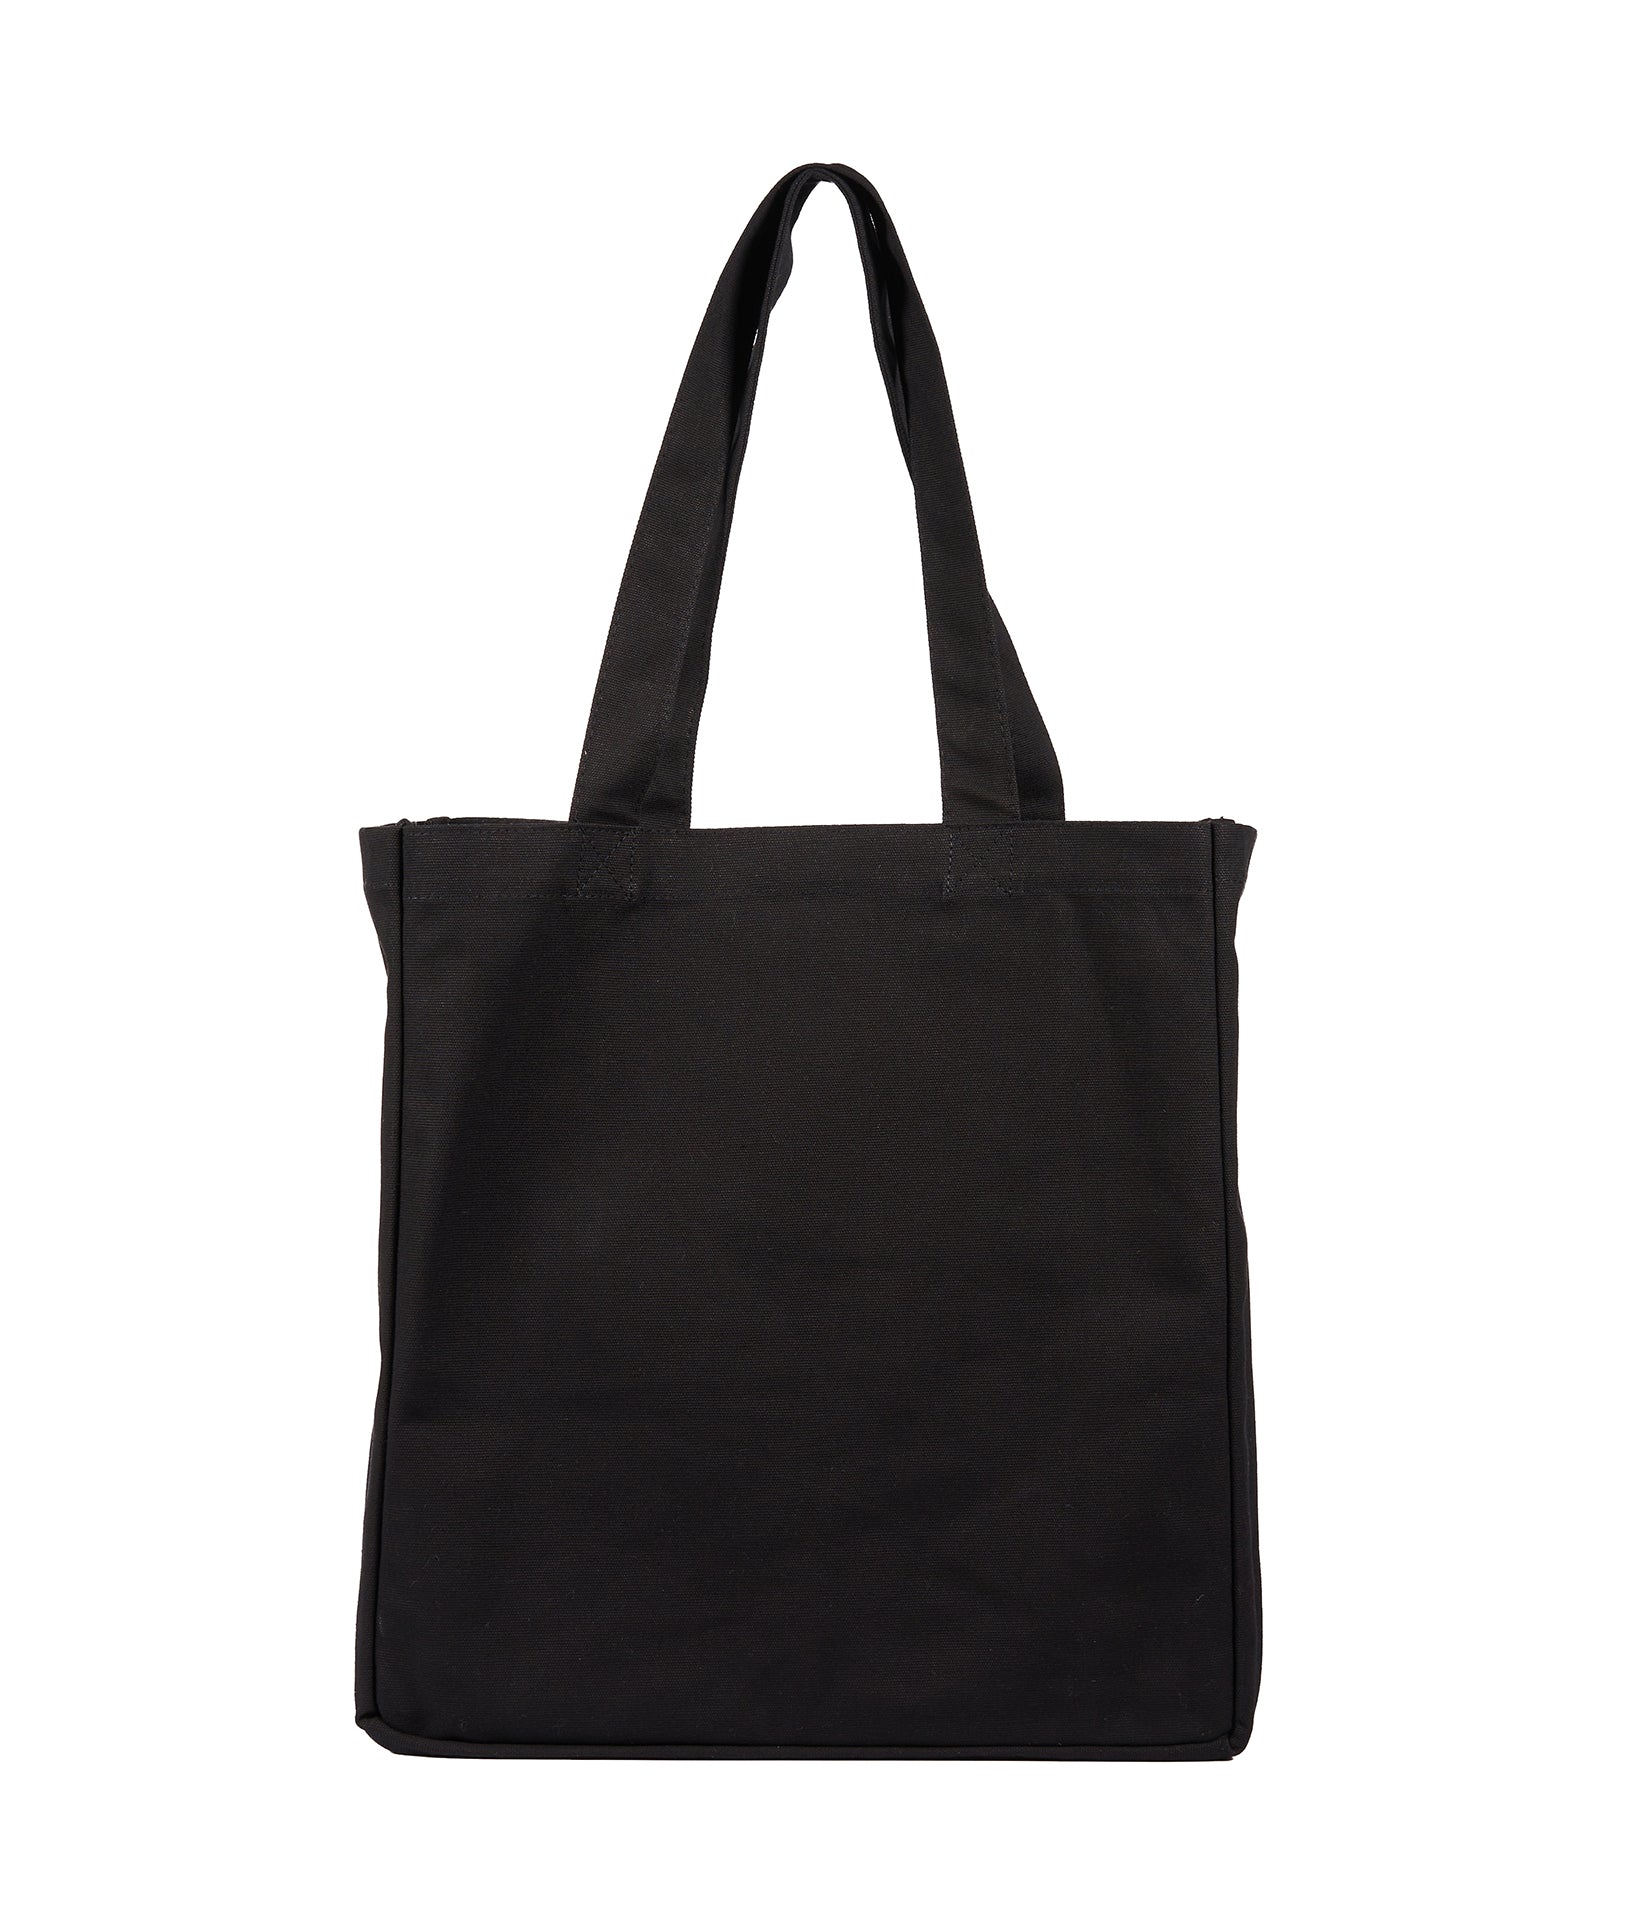 The Goods Tote